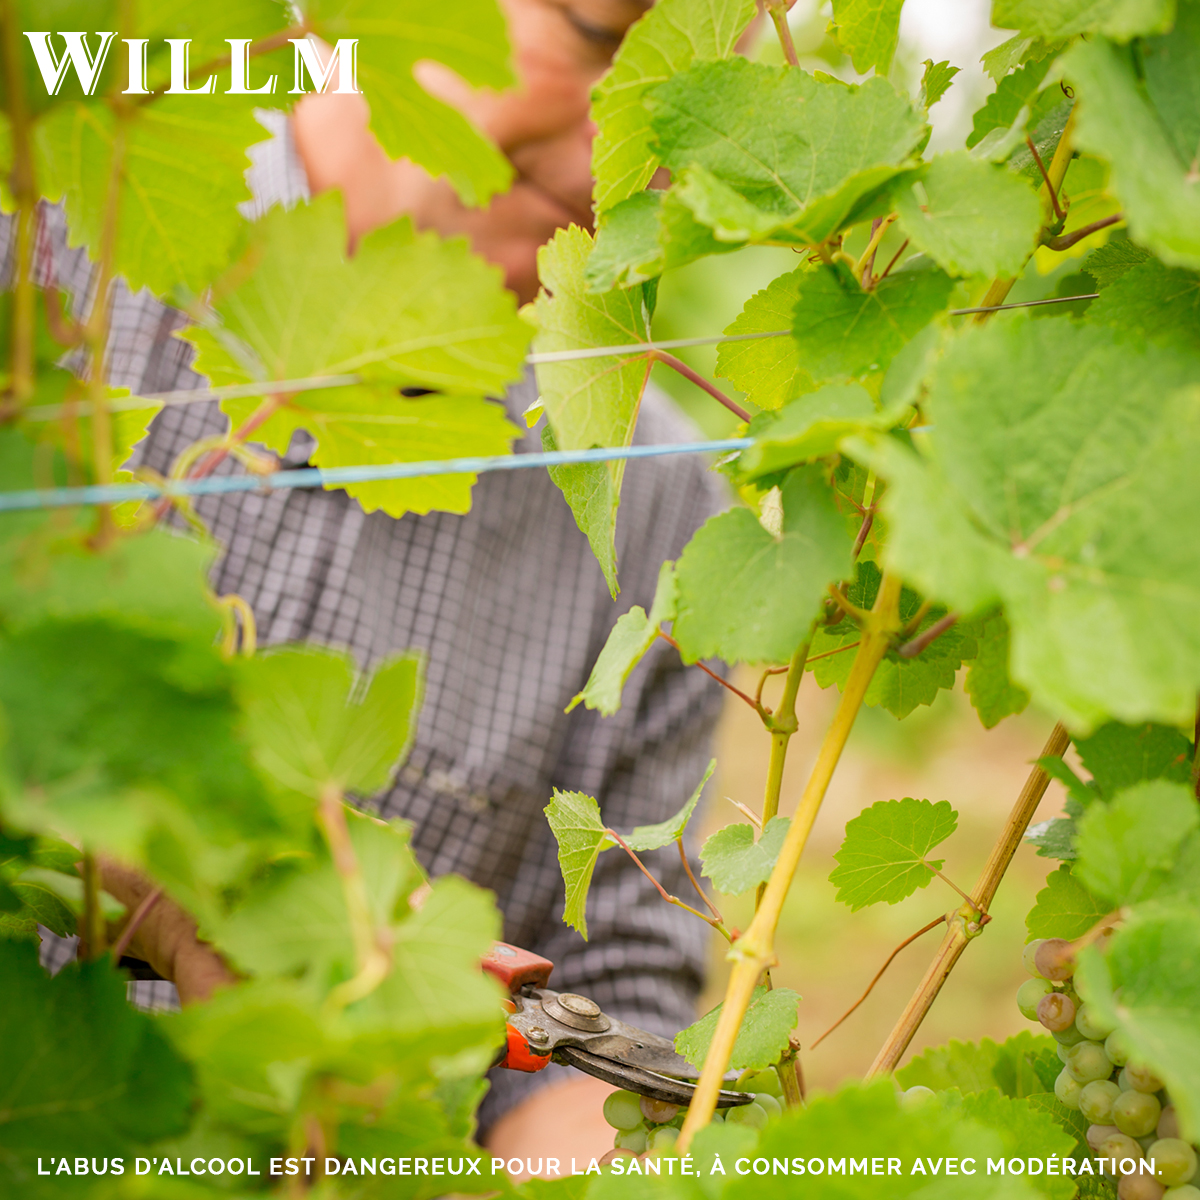 Maison Willm is the guardian of #unique terroirs and we use sustainable farming techniques prioritizing our soils and the #environment. Our wines are renowned #worldwide for their finesse and for encompassing the traditional character of #Alsace’s grape varieties.